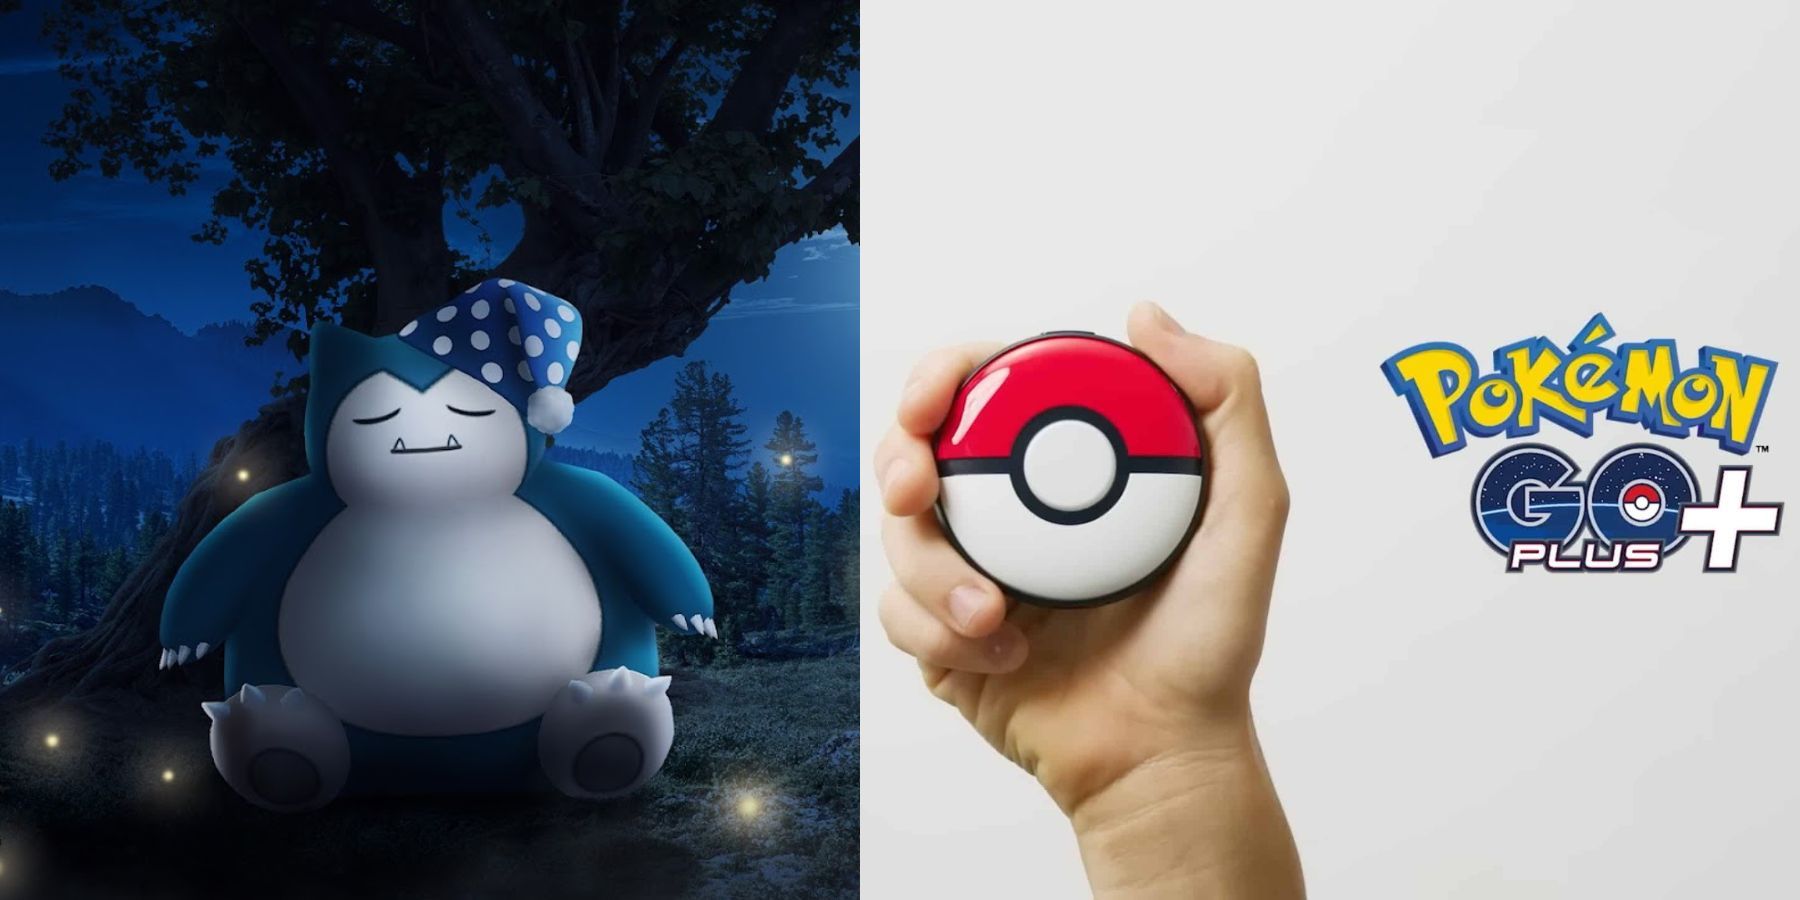 image showing the nightcap snorlax and the pokemon go plus +.